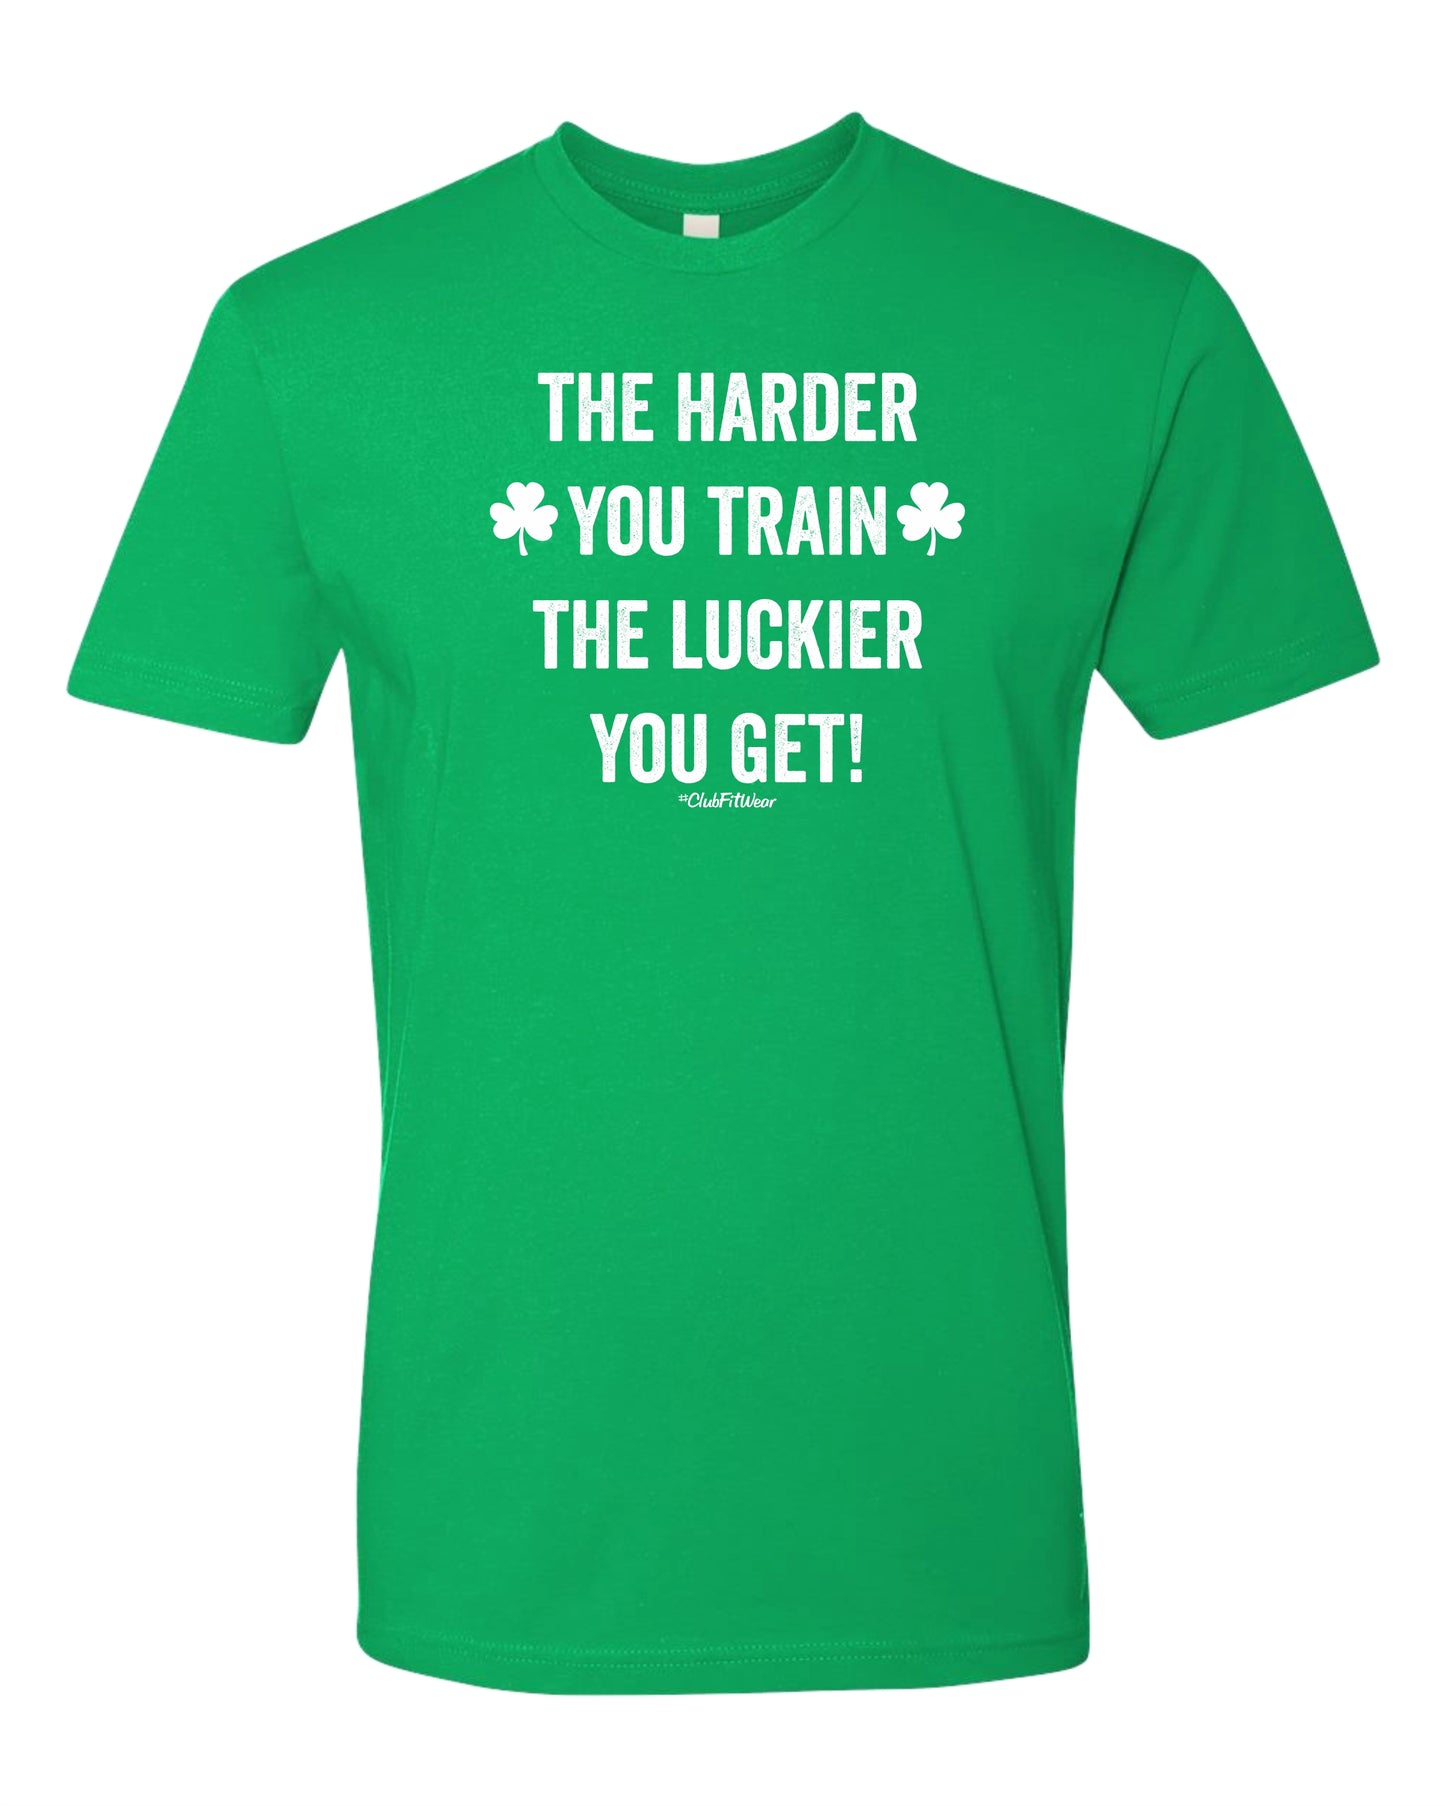 The Harder You Train the Luckier You Get